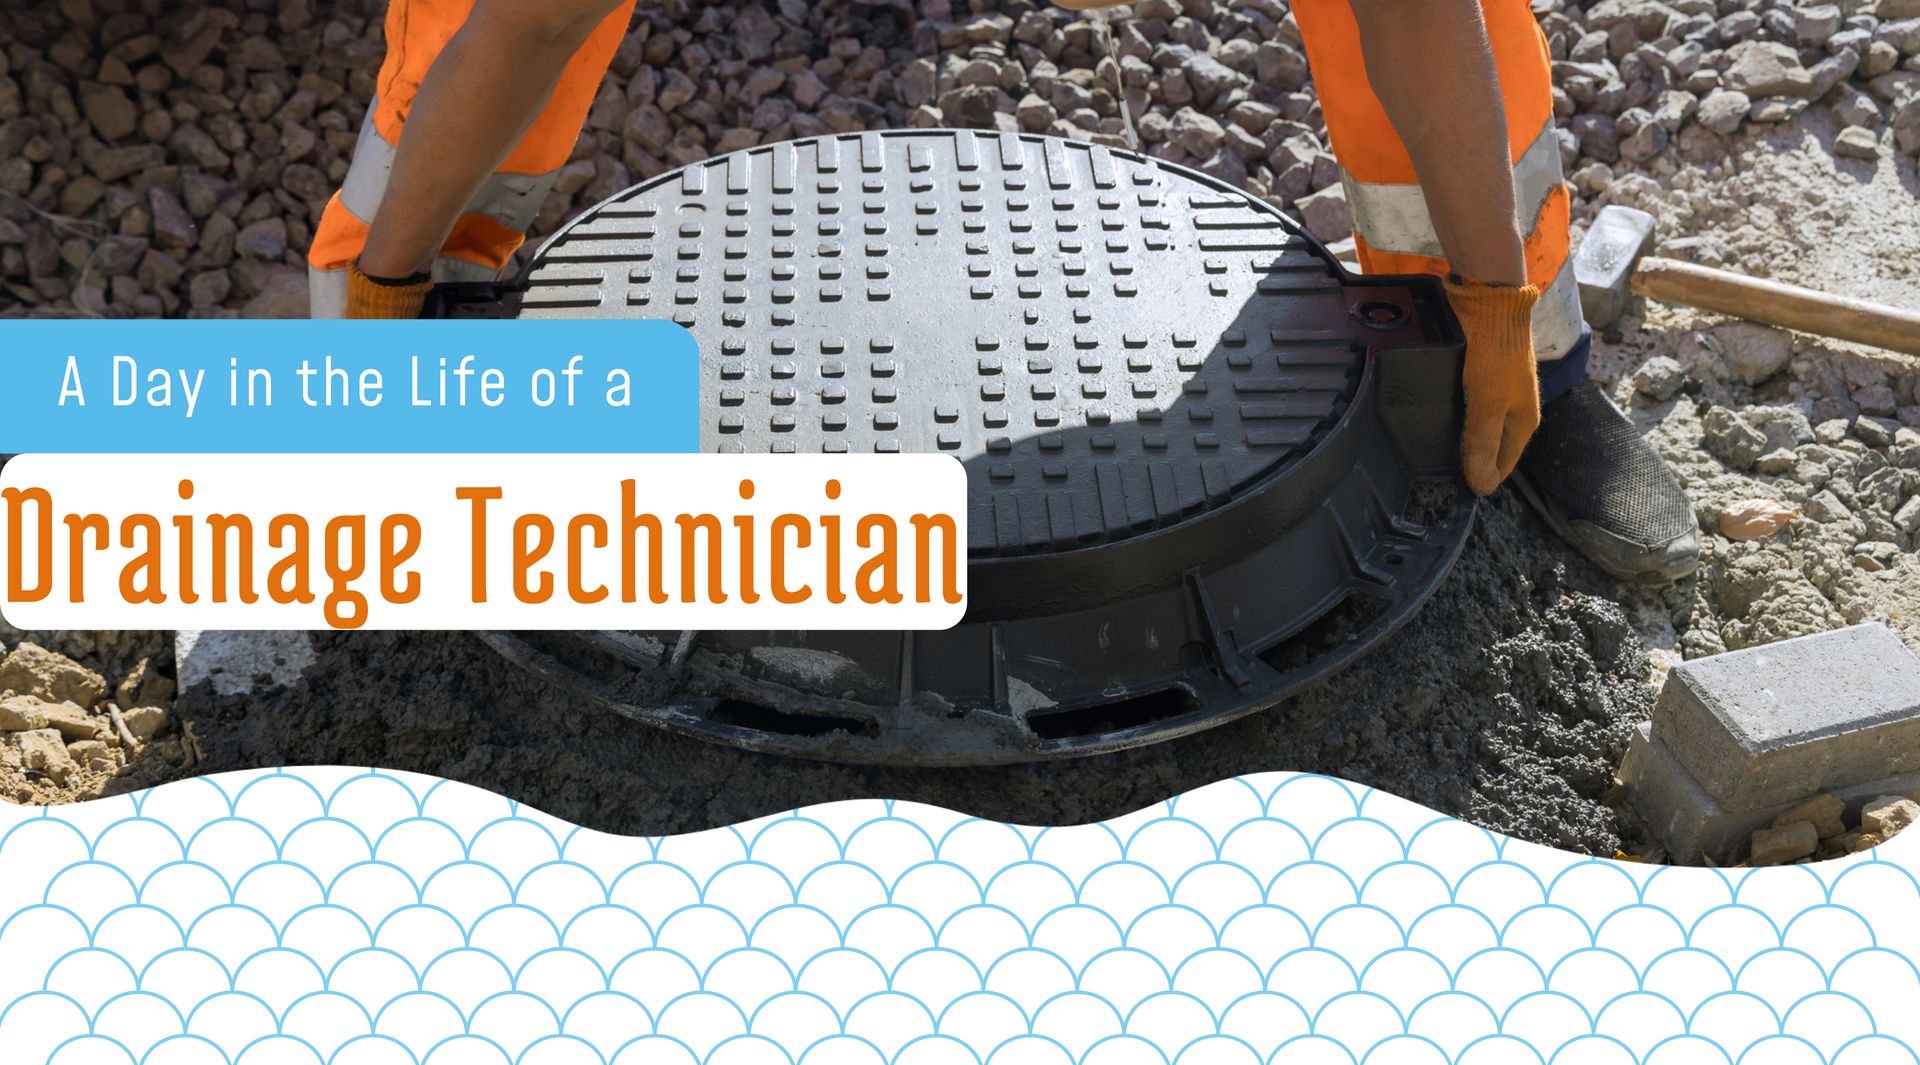 A Day in the Life of a Drainage Technician